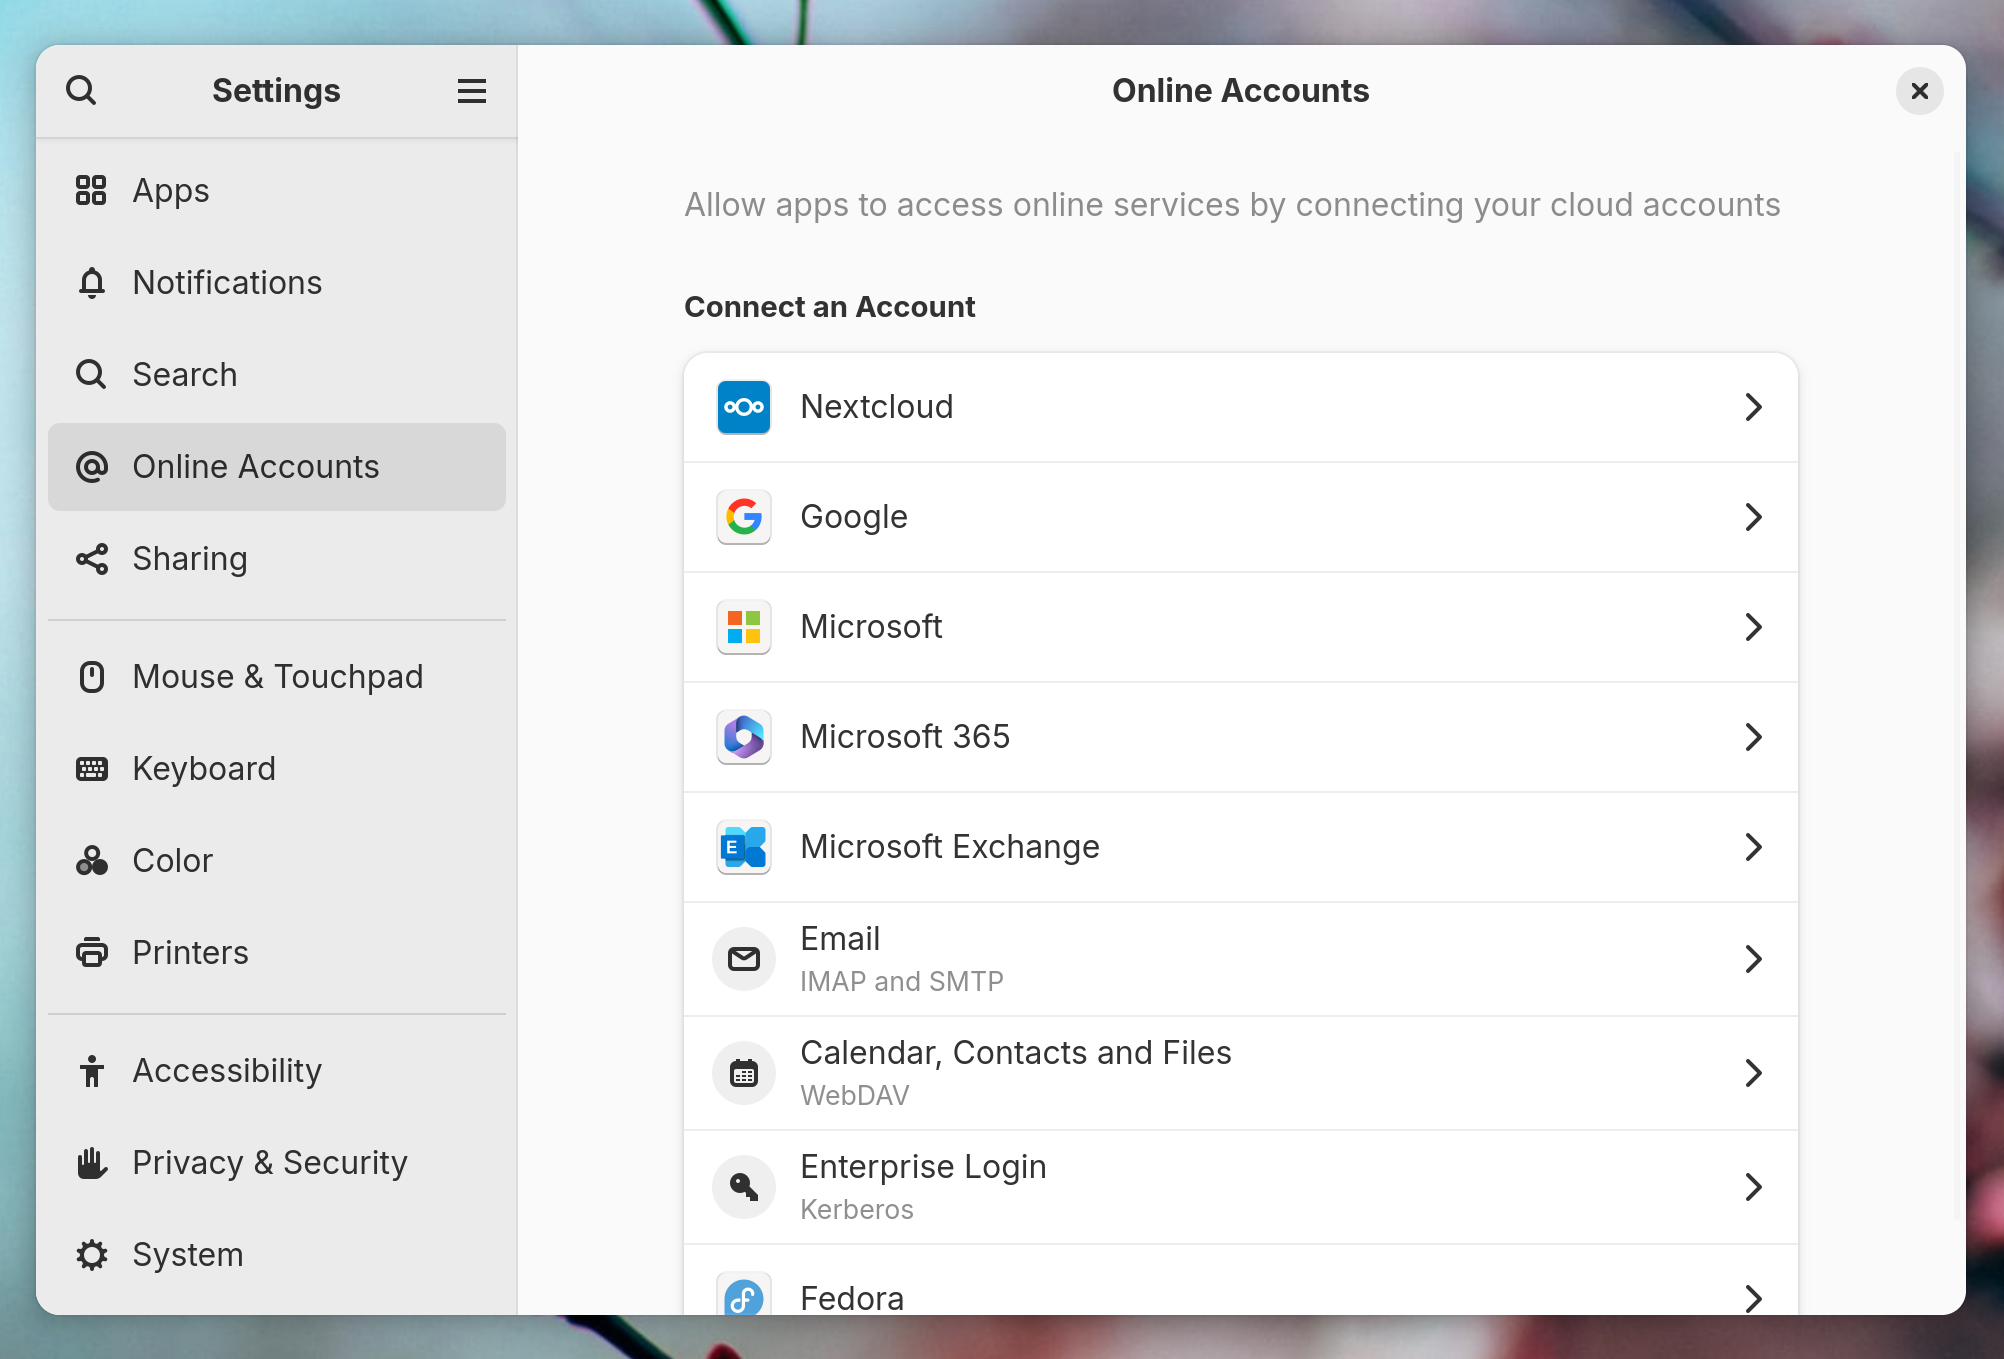 The Settings screen to connect online accounts on Fedora Linux.